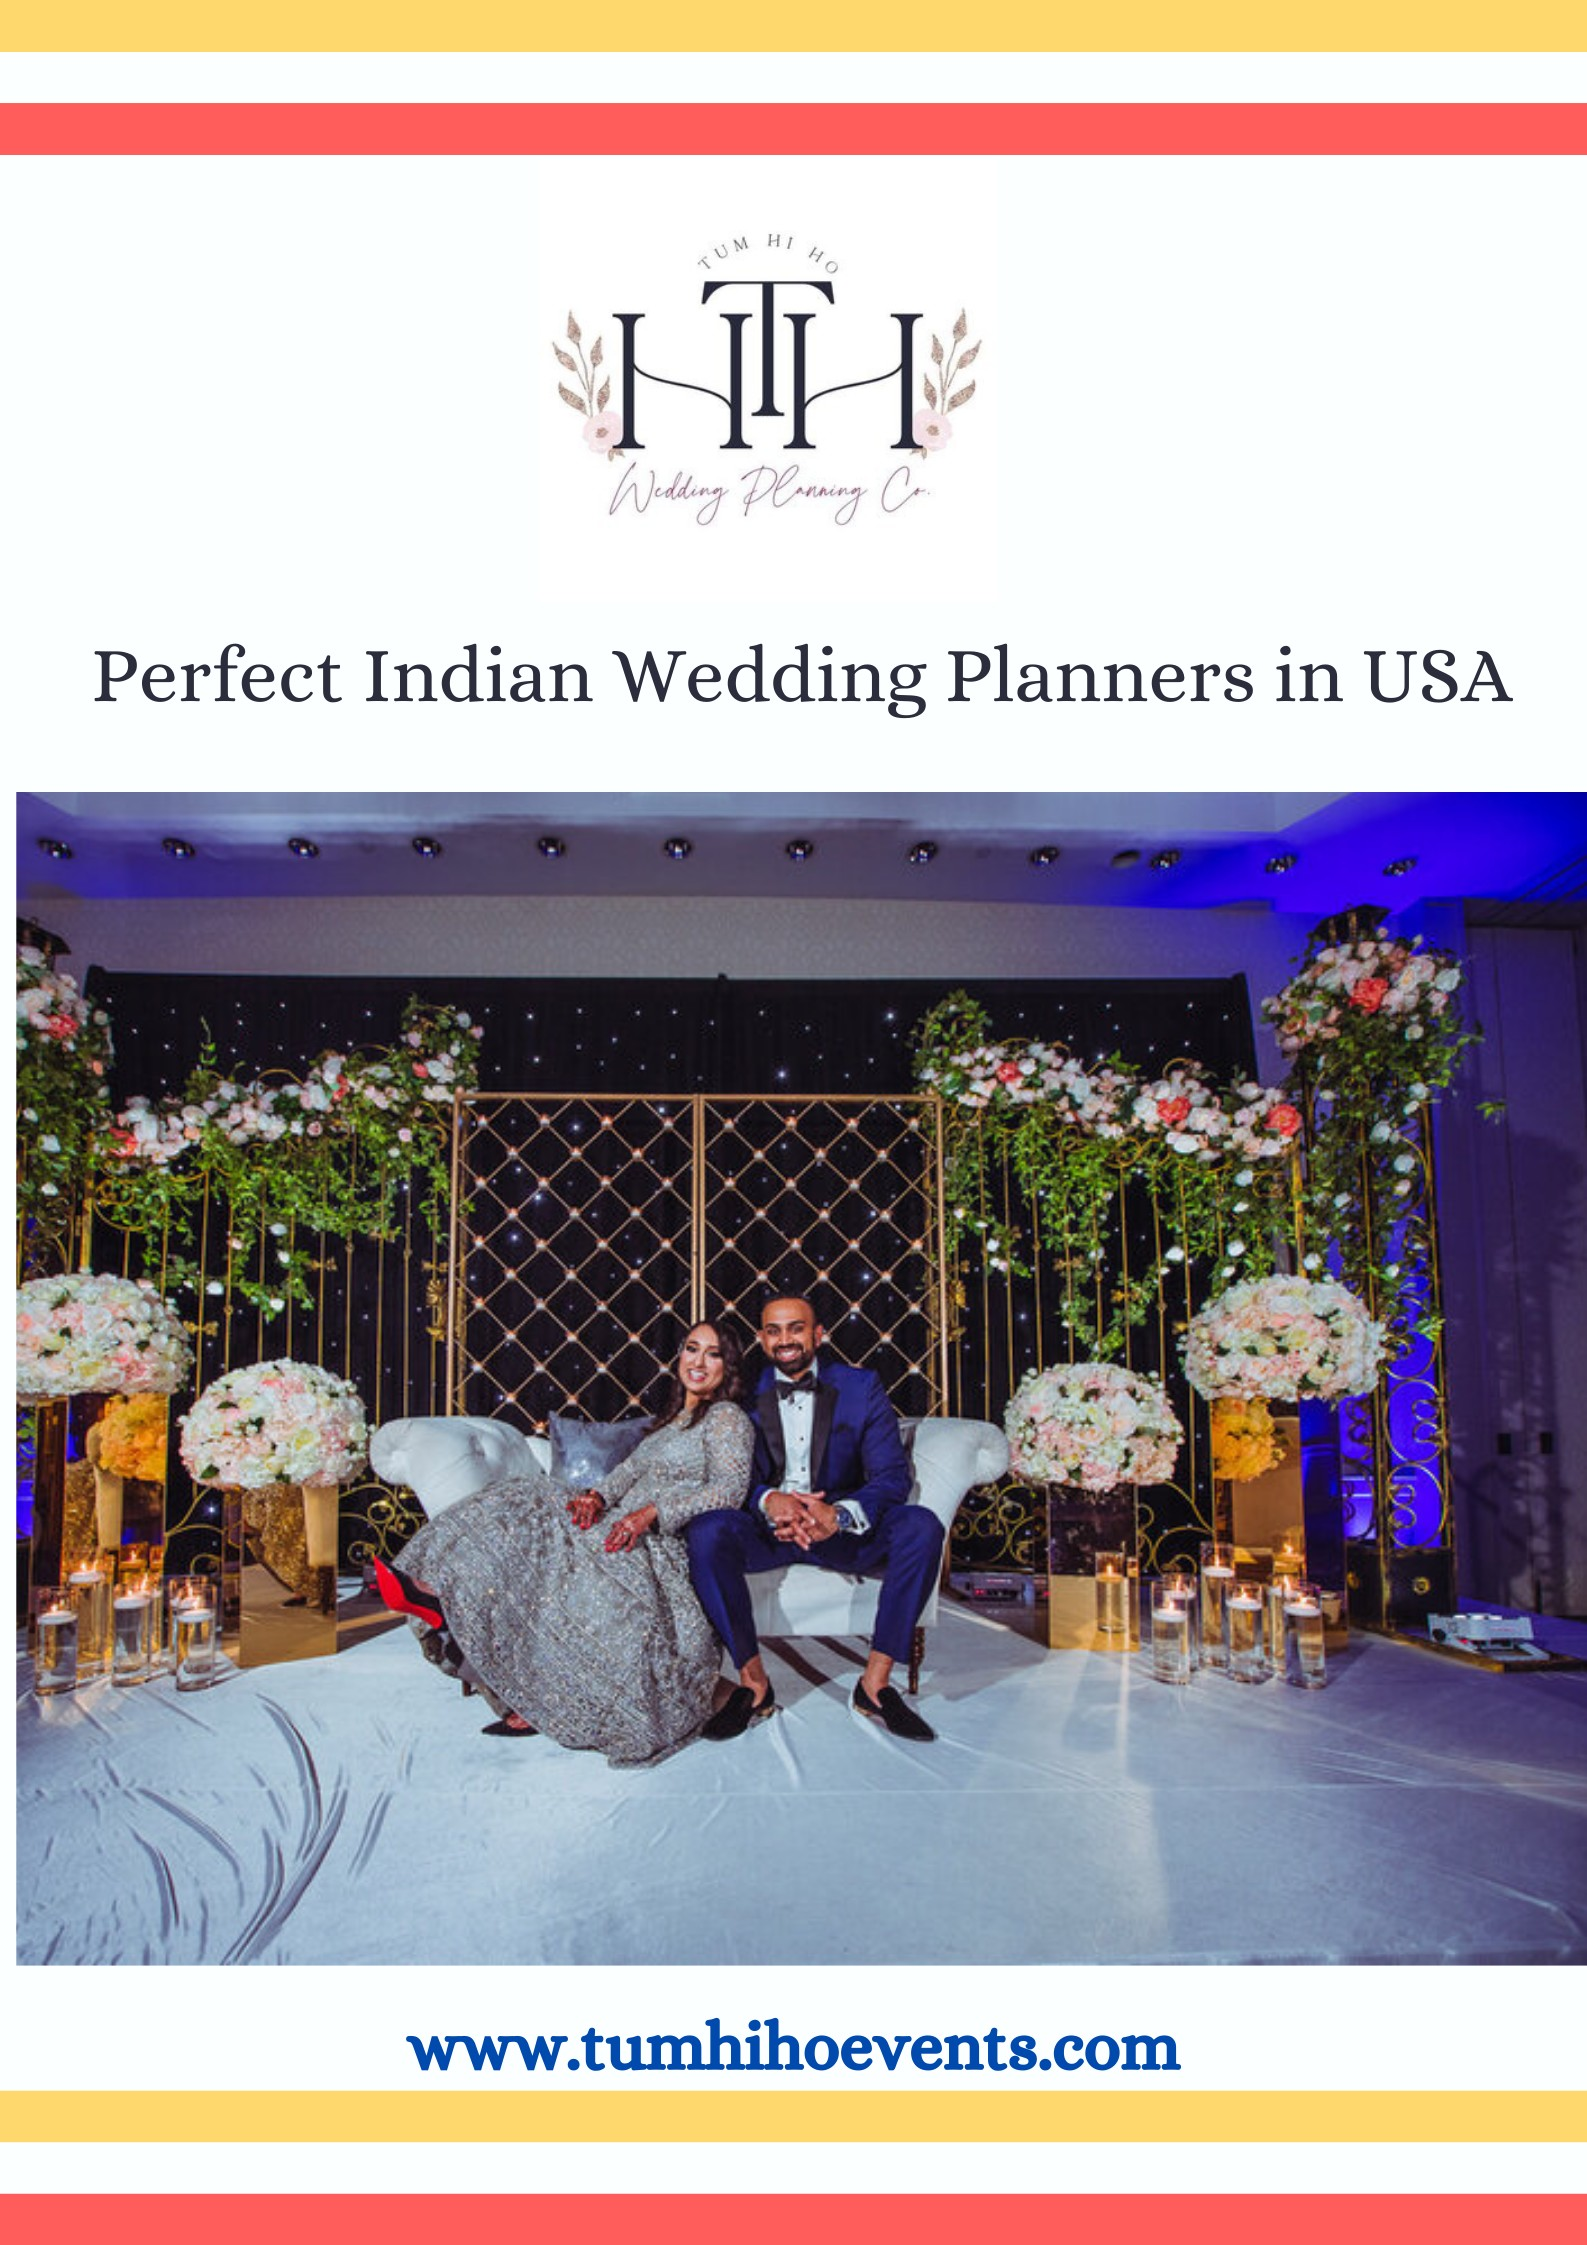 Perfect Indian Wedding Planners in USA